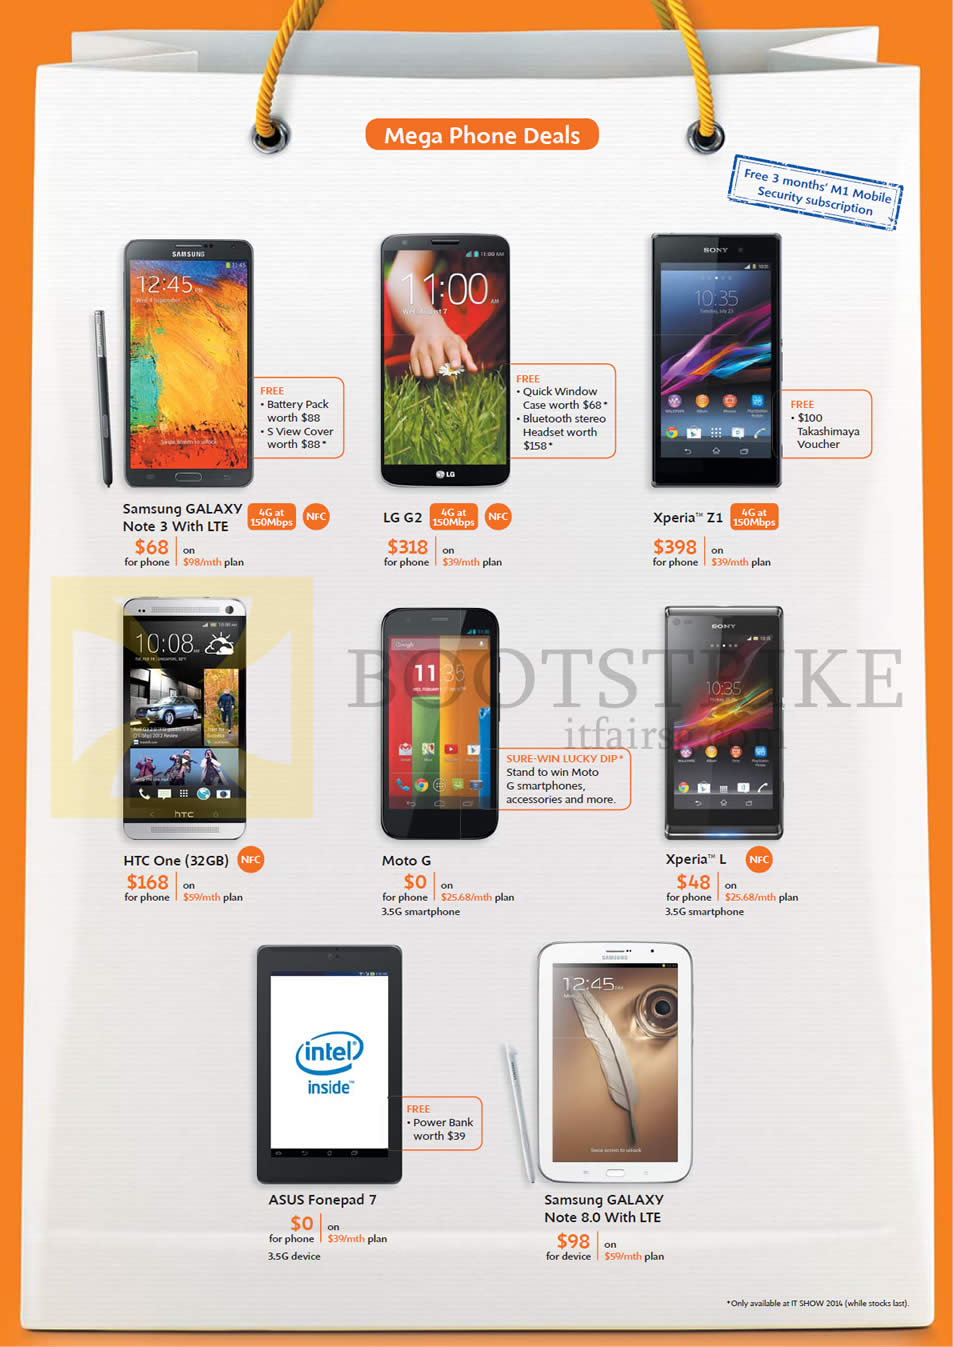 IT SHOW 2014 price list image brochure of M1 Mobile Samsung Galaxy Note 3 8.0, LG G2, Sony Xperia Z1, L, HTC One, Moto G, ASUS Fonepad 7